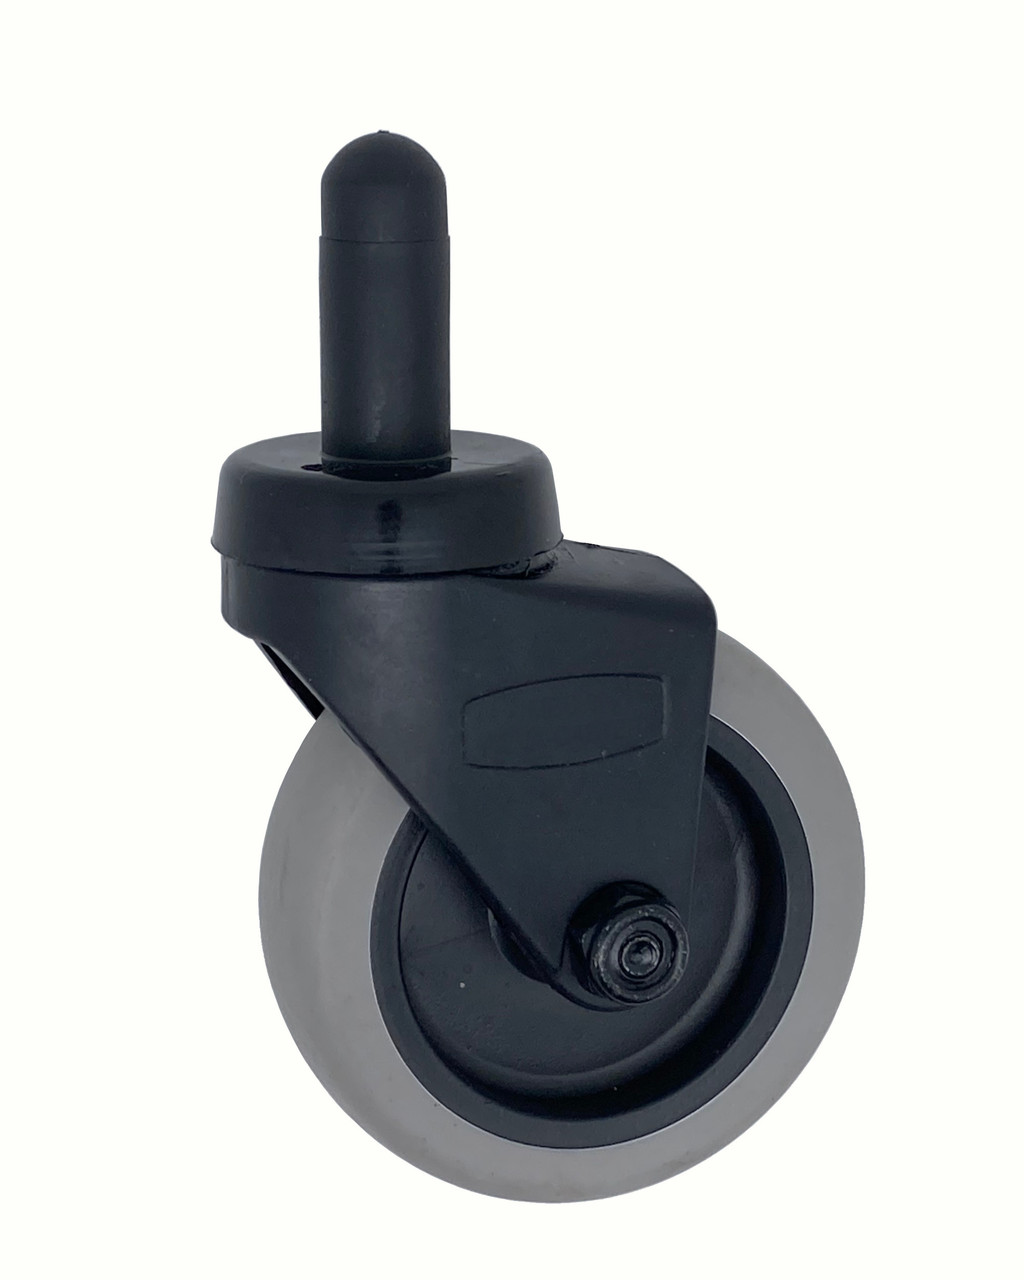 3MOPCASTER 3 Inch Black Plastic Mop Caster for use on Rubbermaid® buckets